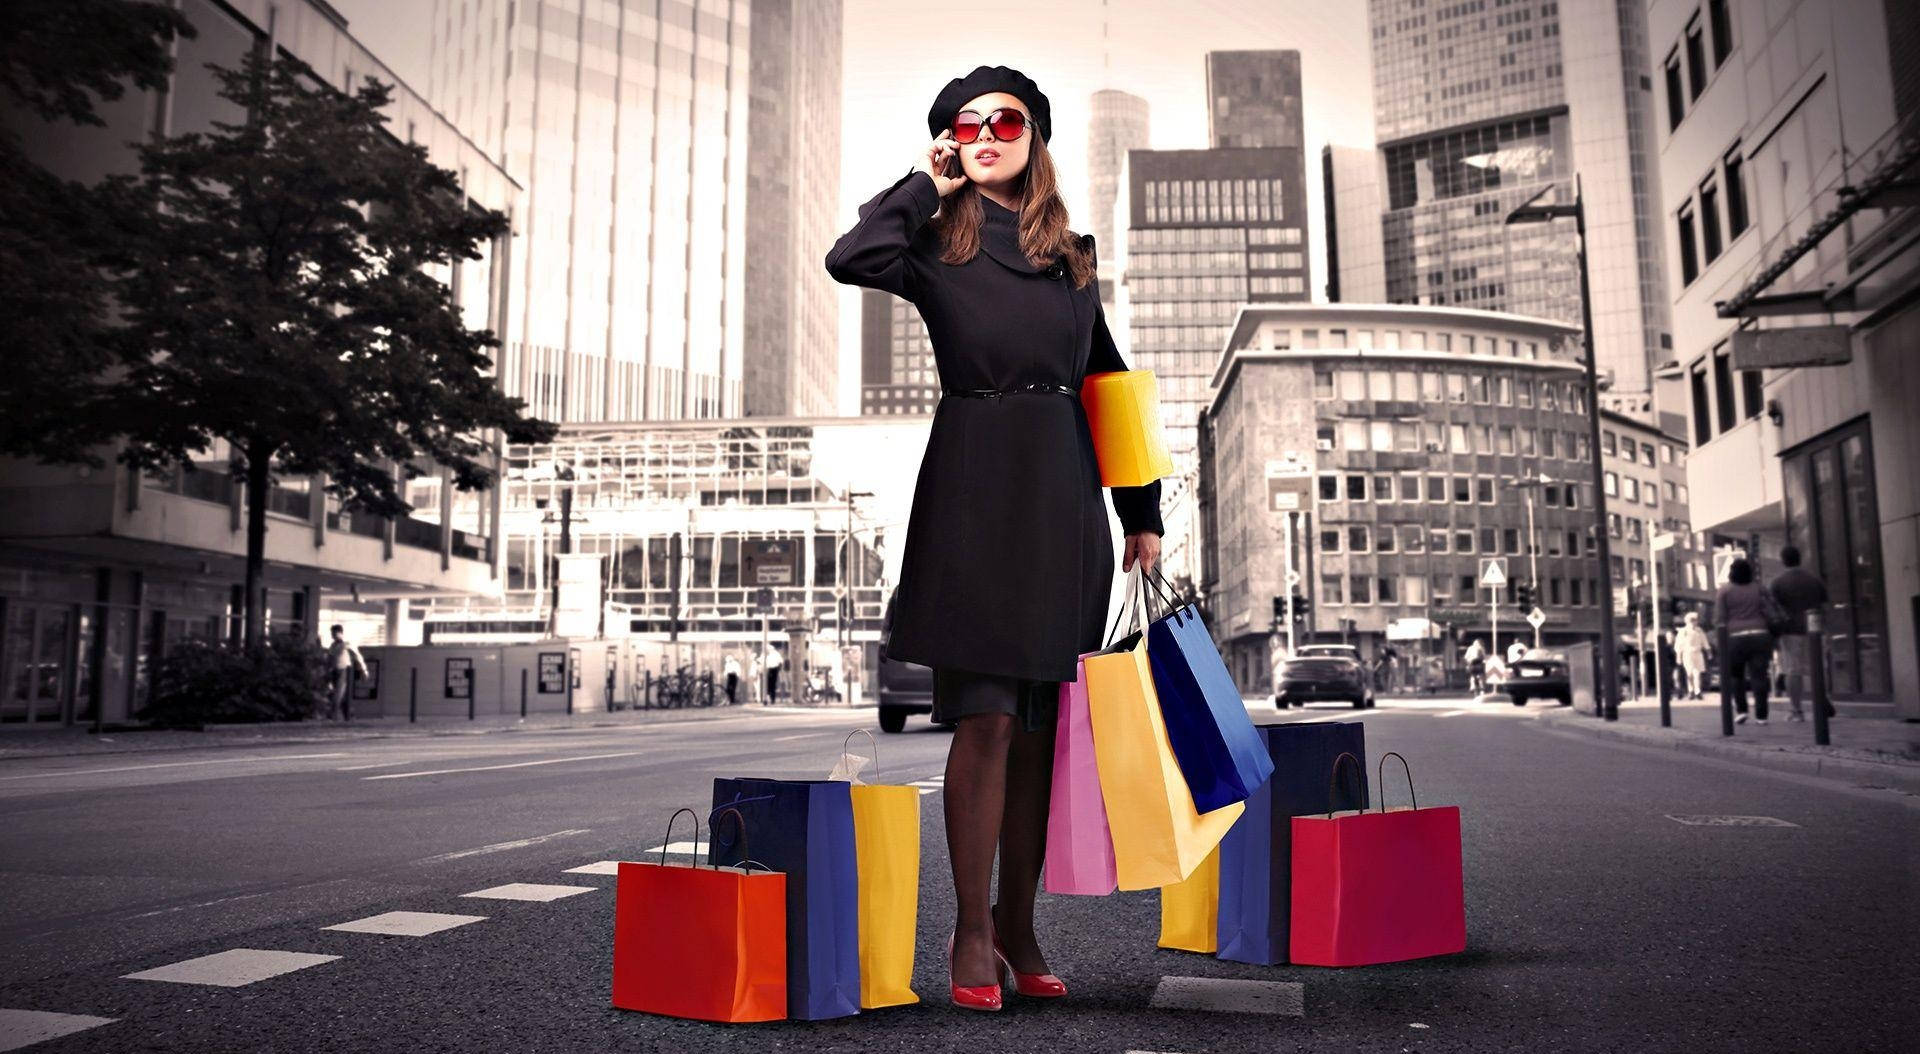 Woman Shopping With Sunglasses Wallpaper